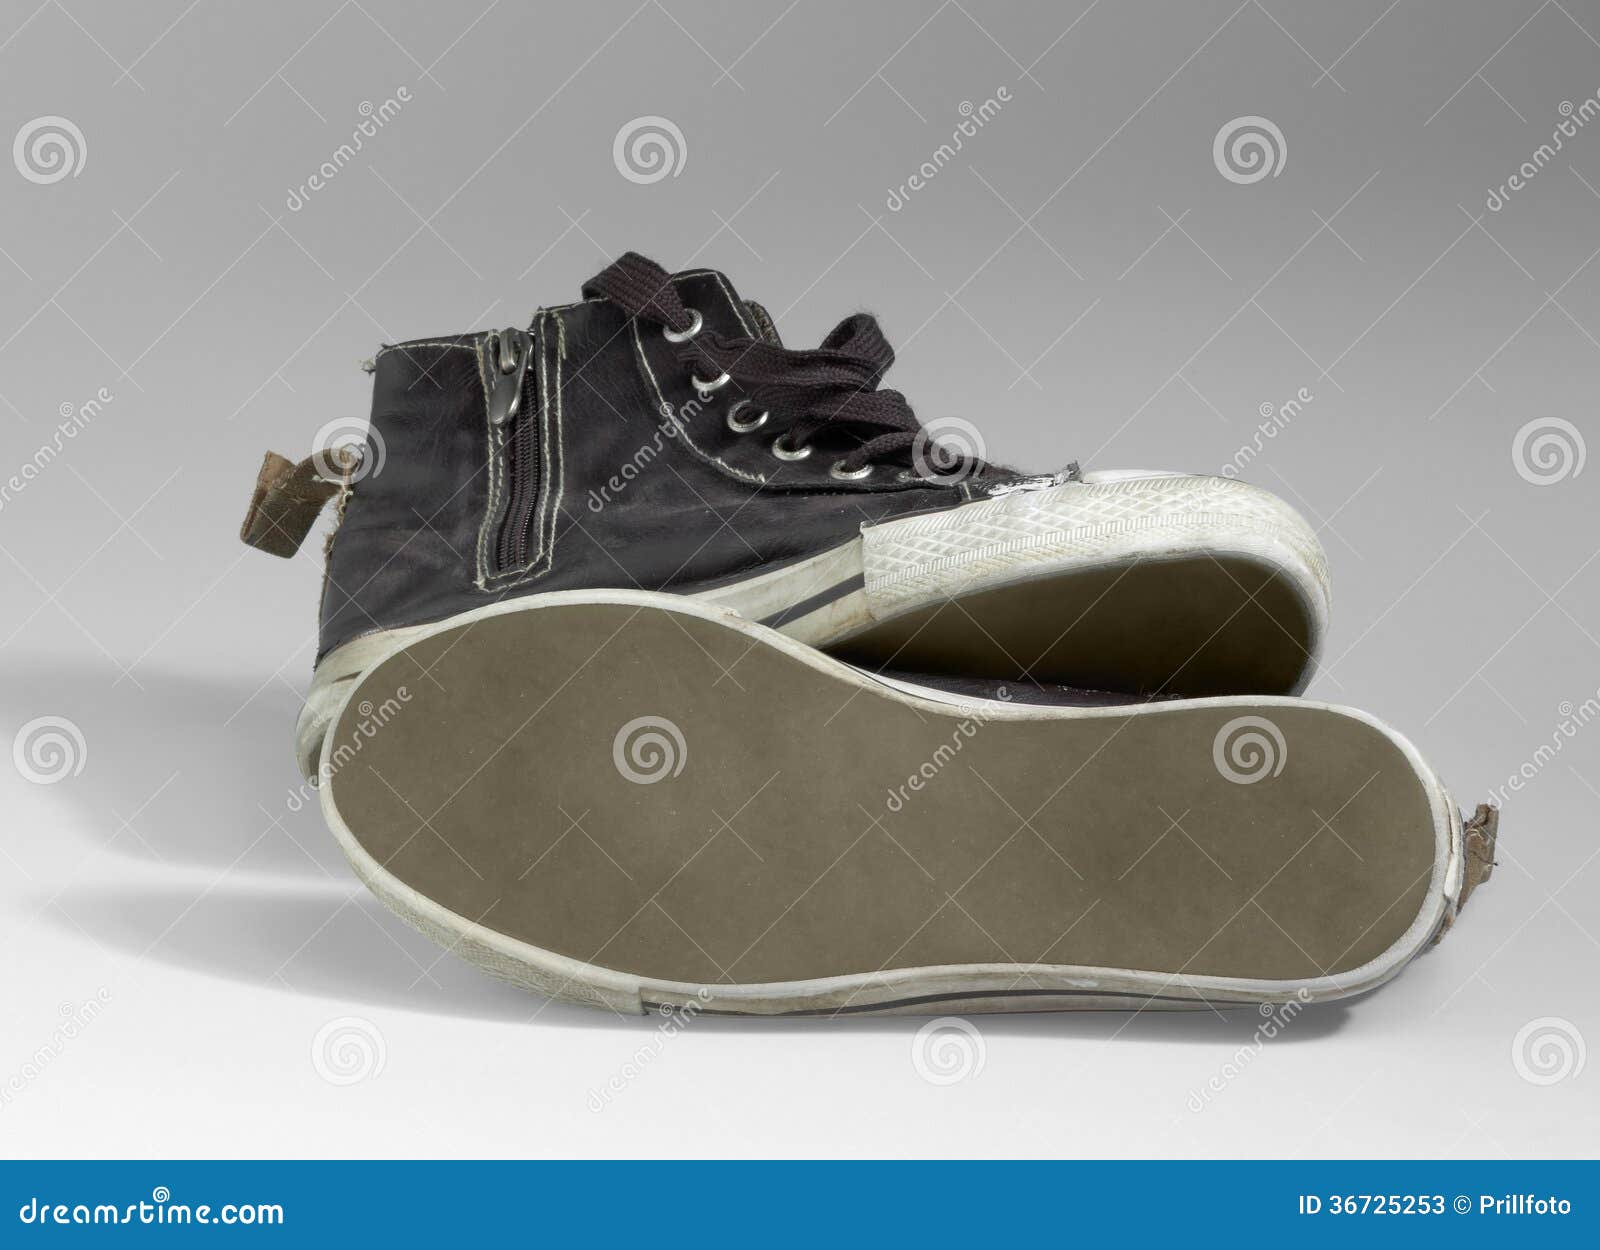 Old sneakers stock image. Image of dingy, shoe, runners - 36725253